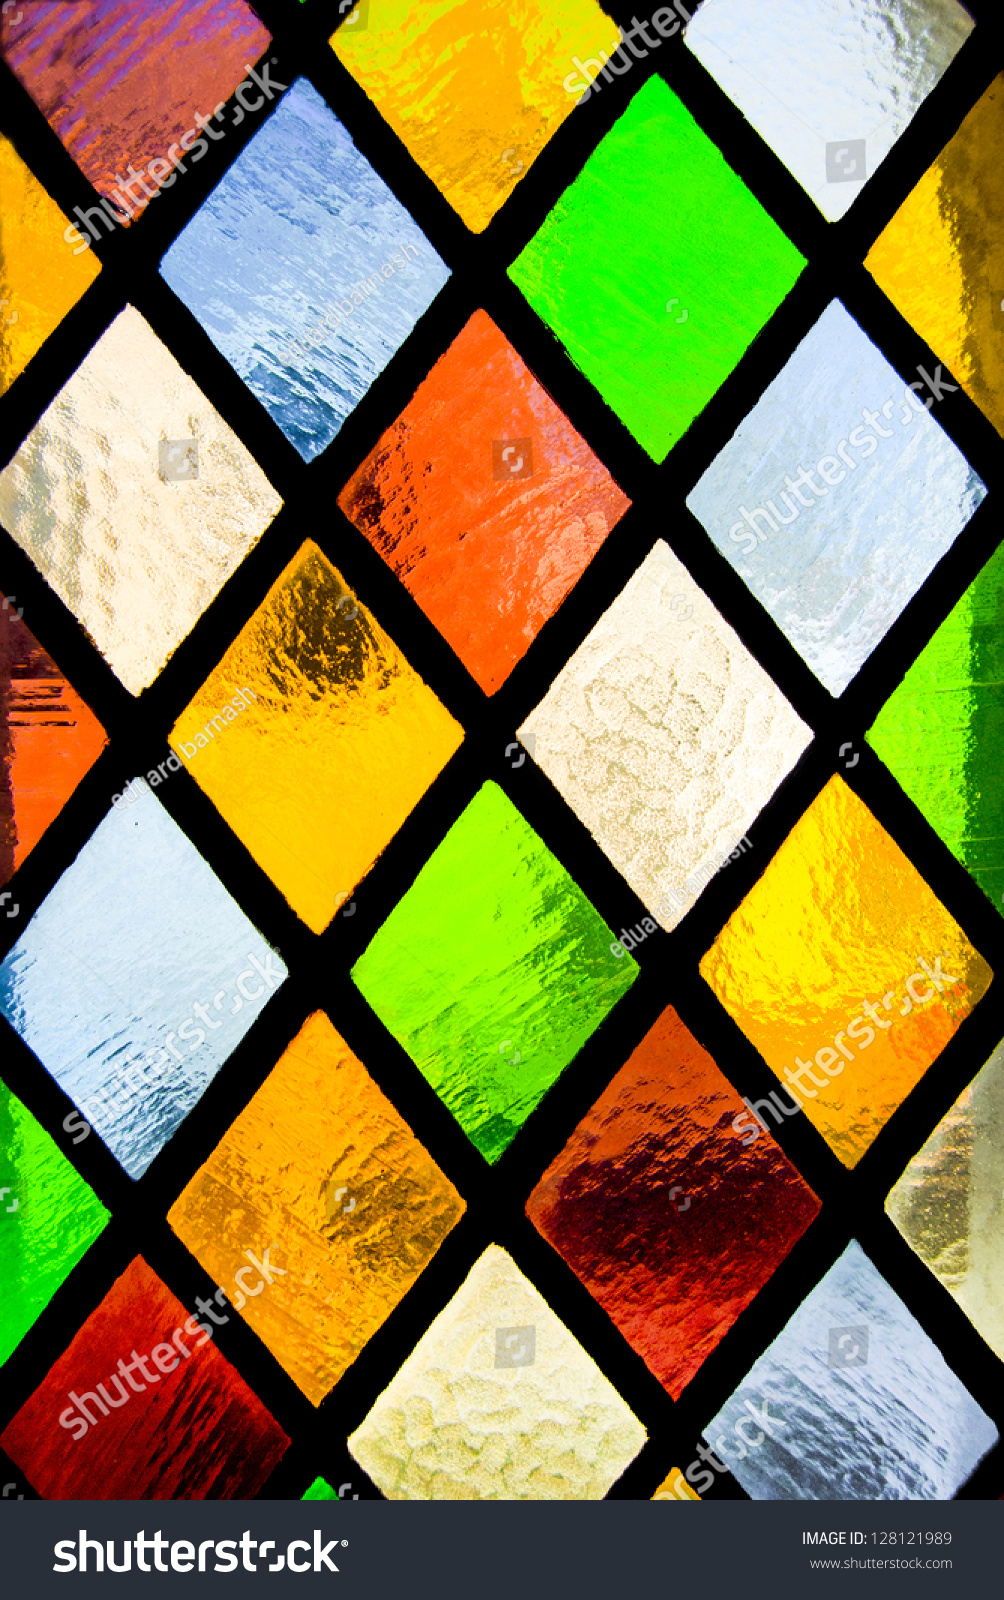 Stained Glass  Window  Colored  Glass  Stock Photo 128121989 